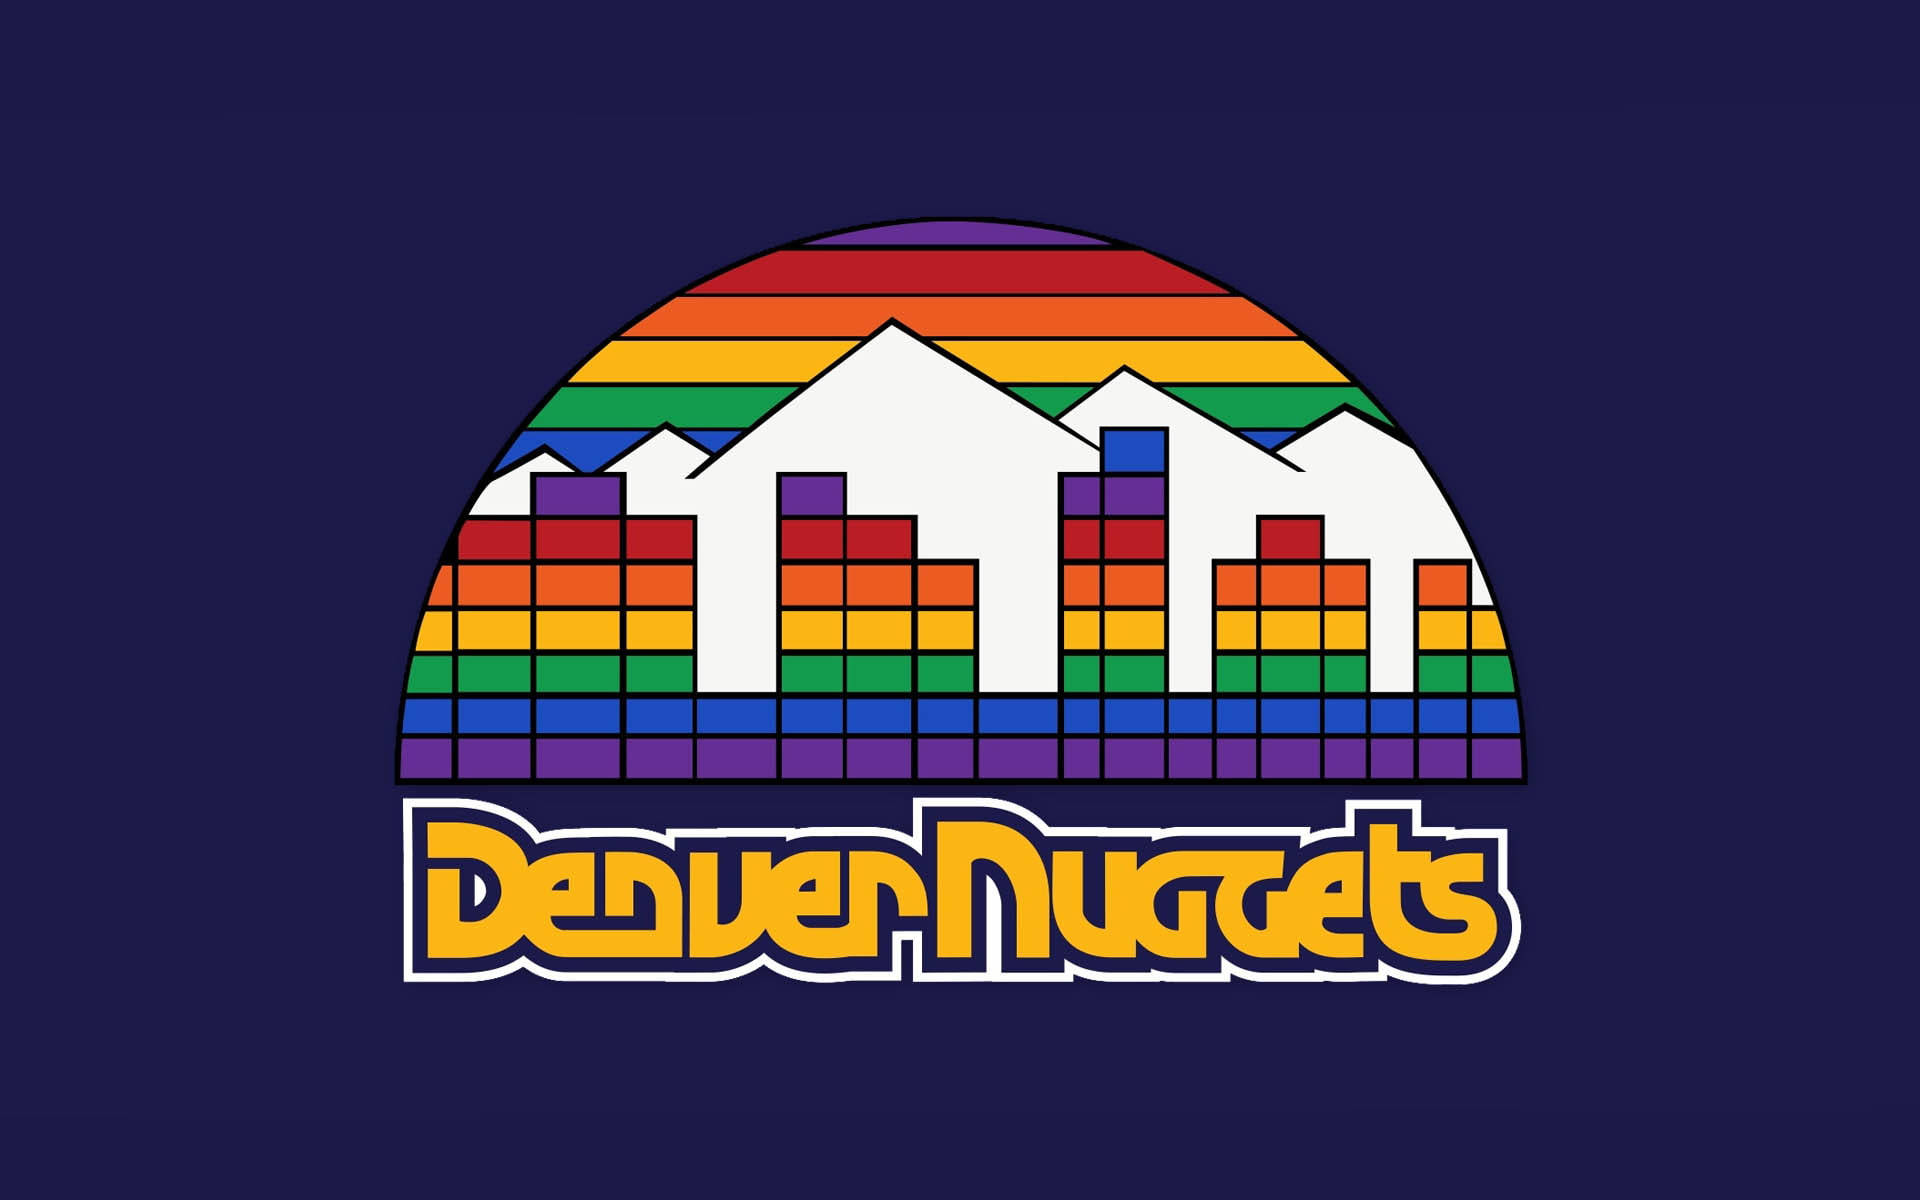 Top 999+ Denver Nuggets Wallpaper Full HD, 4K Free to Use